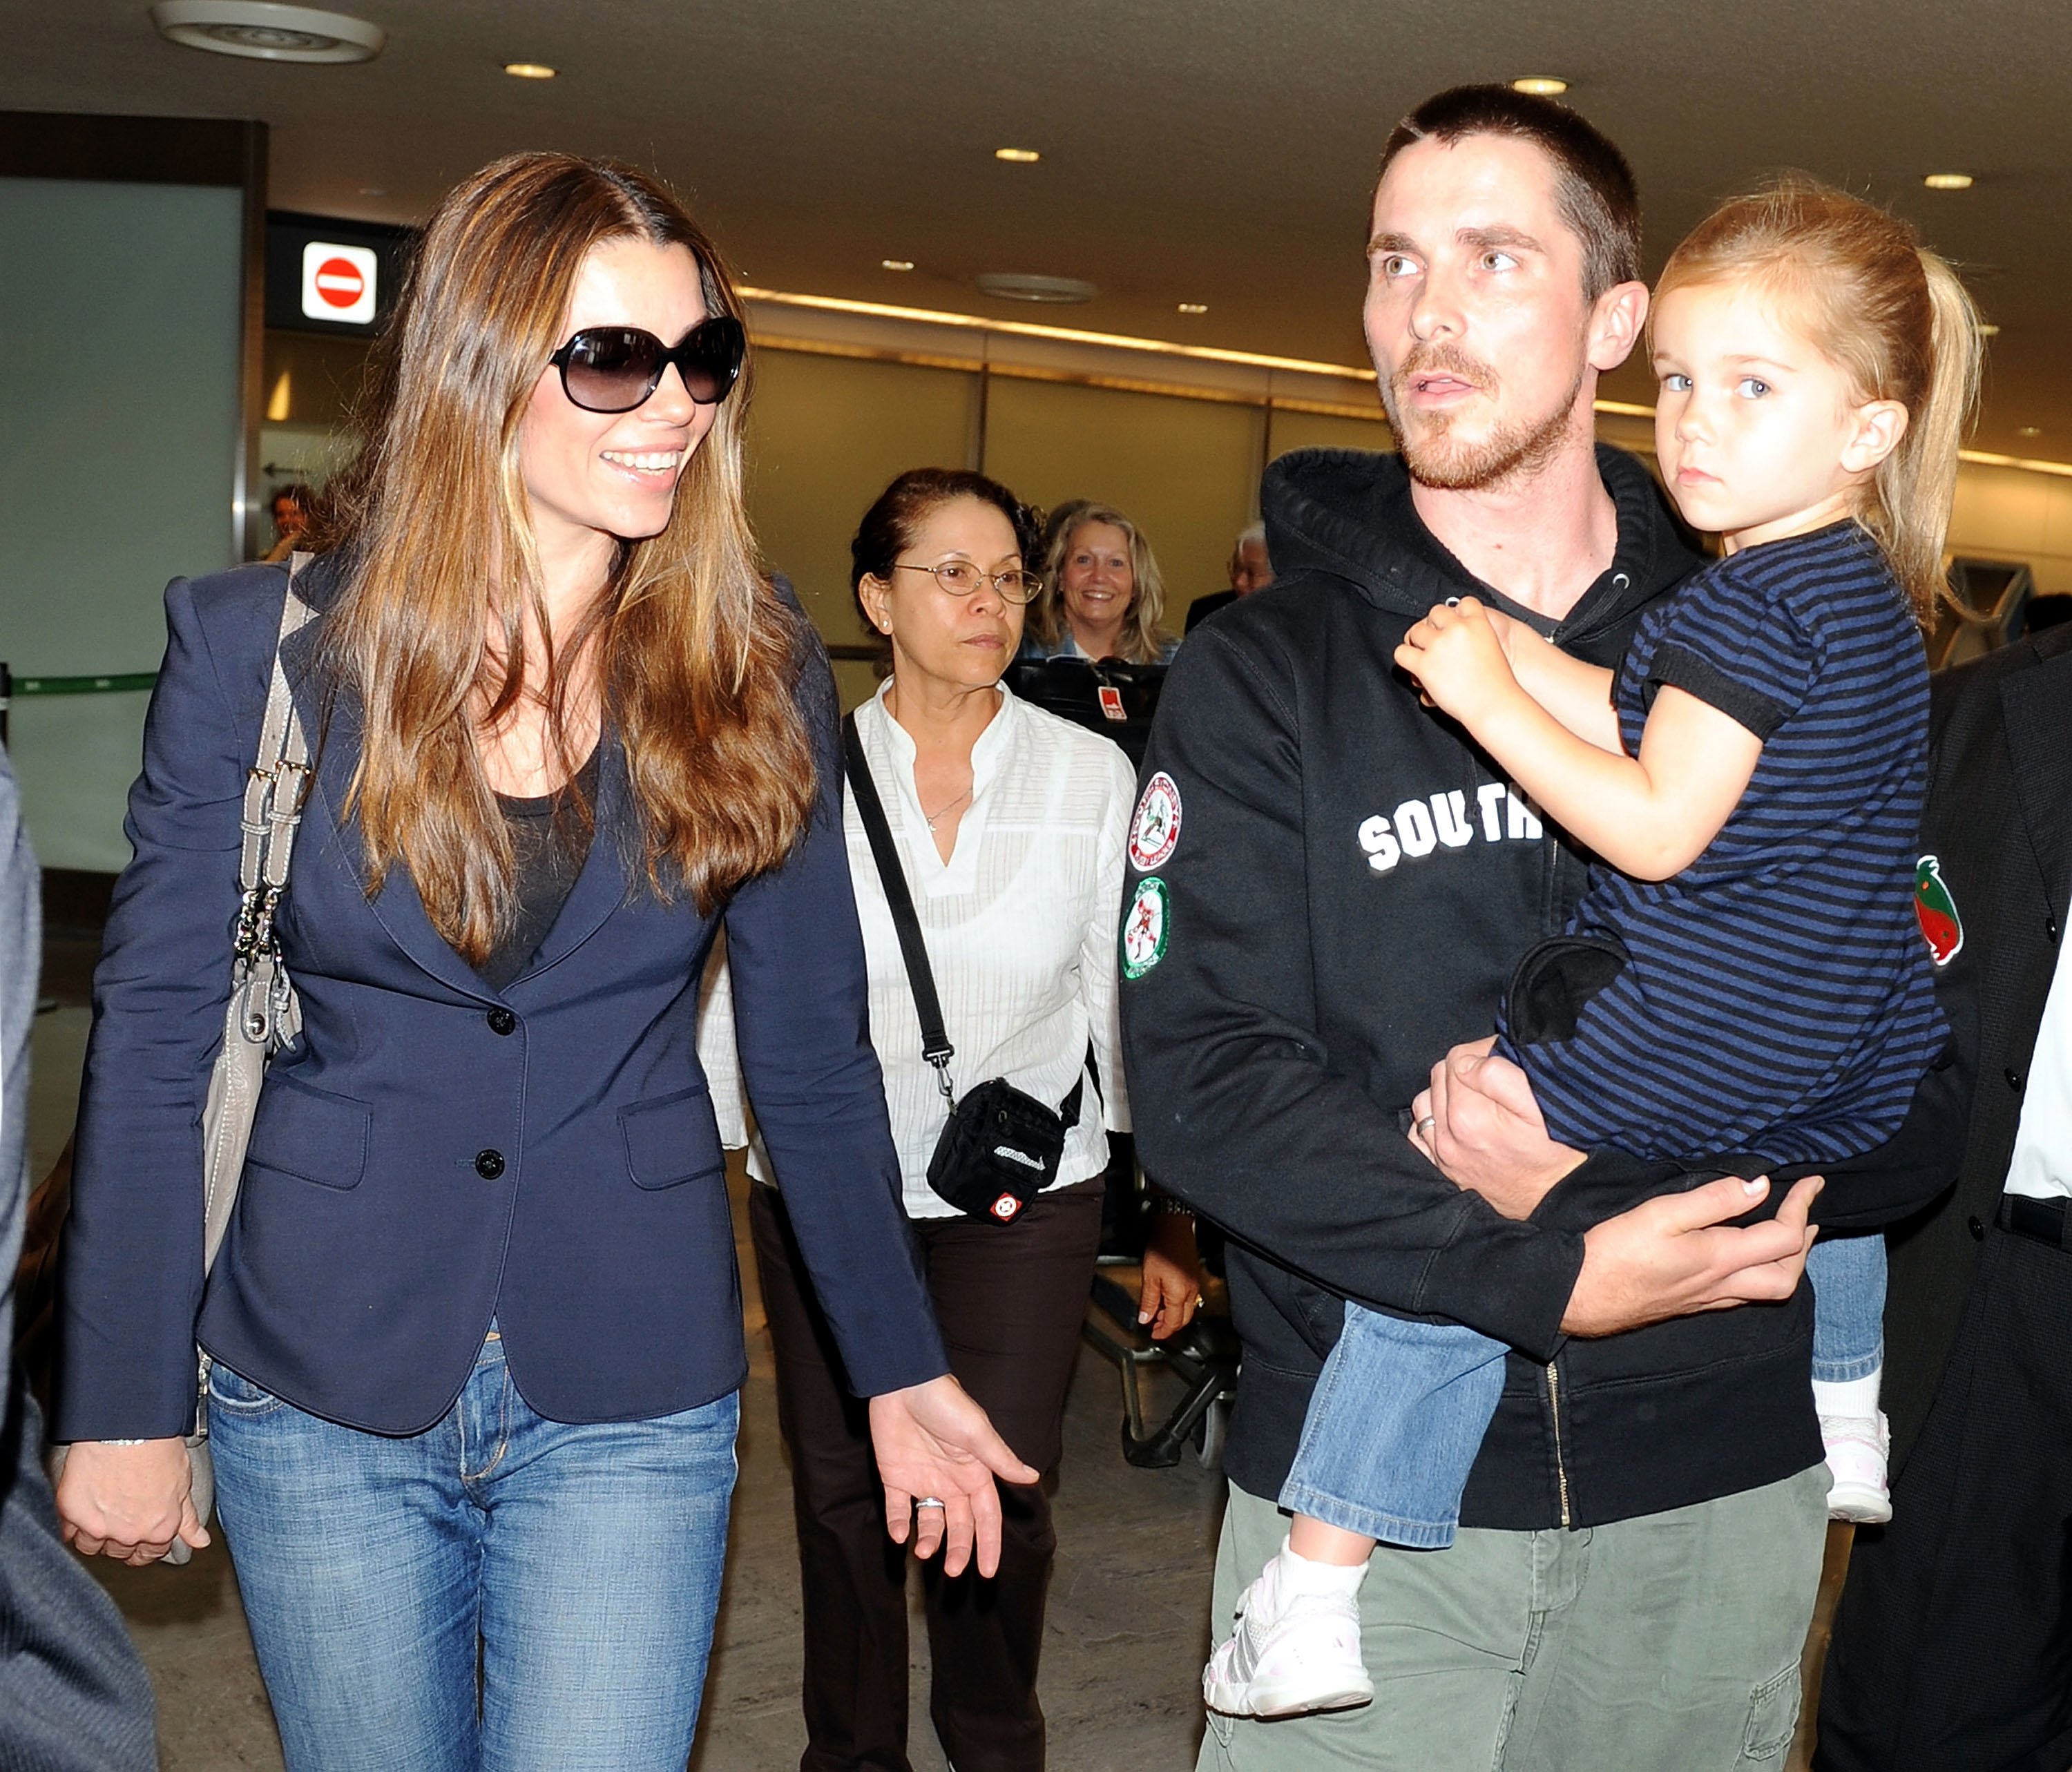 Actor Christian Bale (R) with his daughter and Sibi Bale (L) arrive at Narita International Airport for the promotion of "The Dark Knight" on July 26, 2008 in Narita, Chiba, Japan. | Source: Getty Images